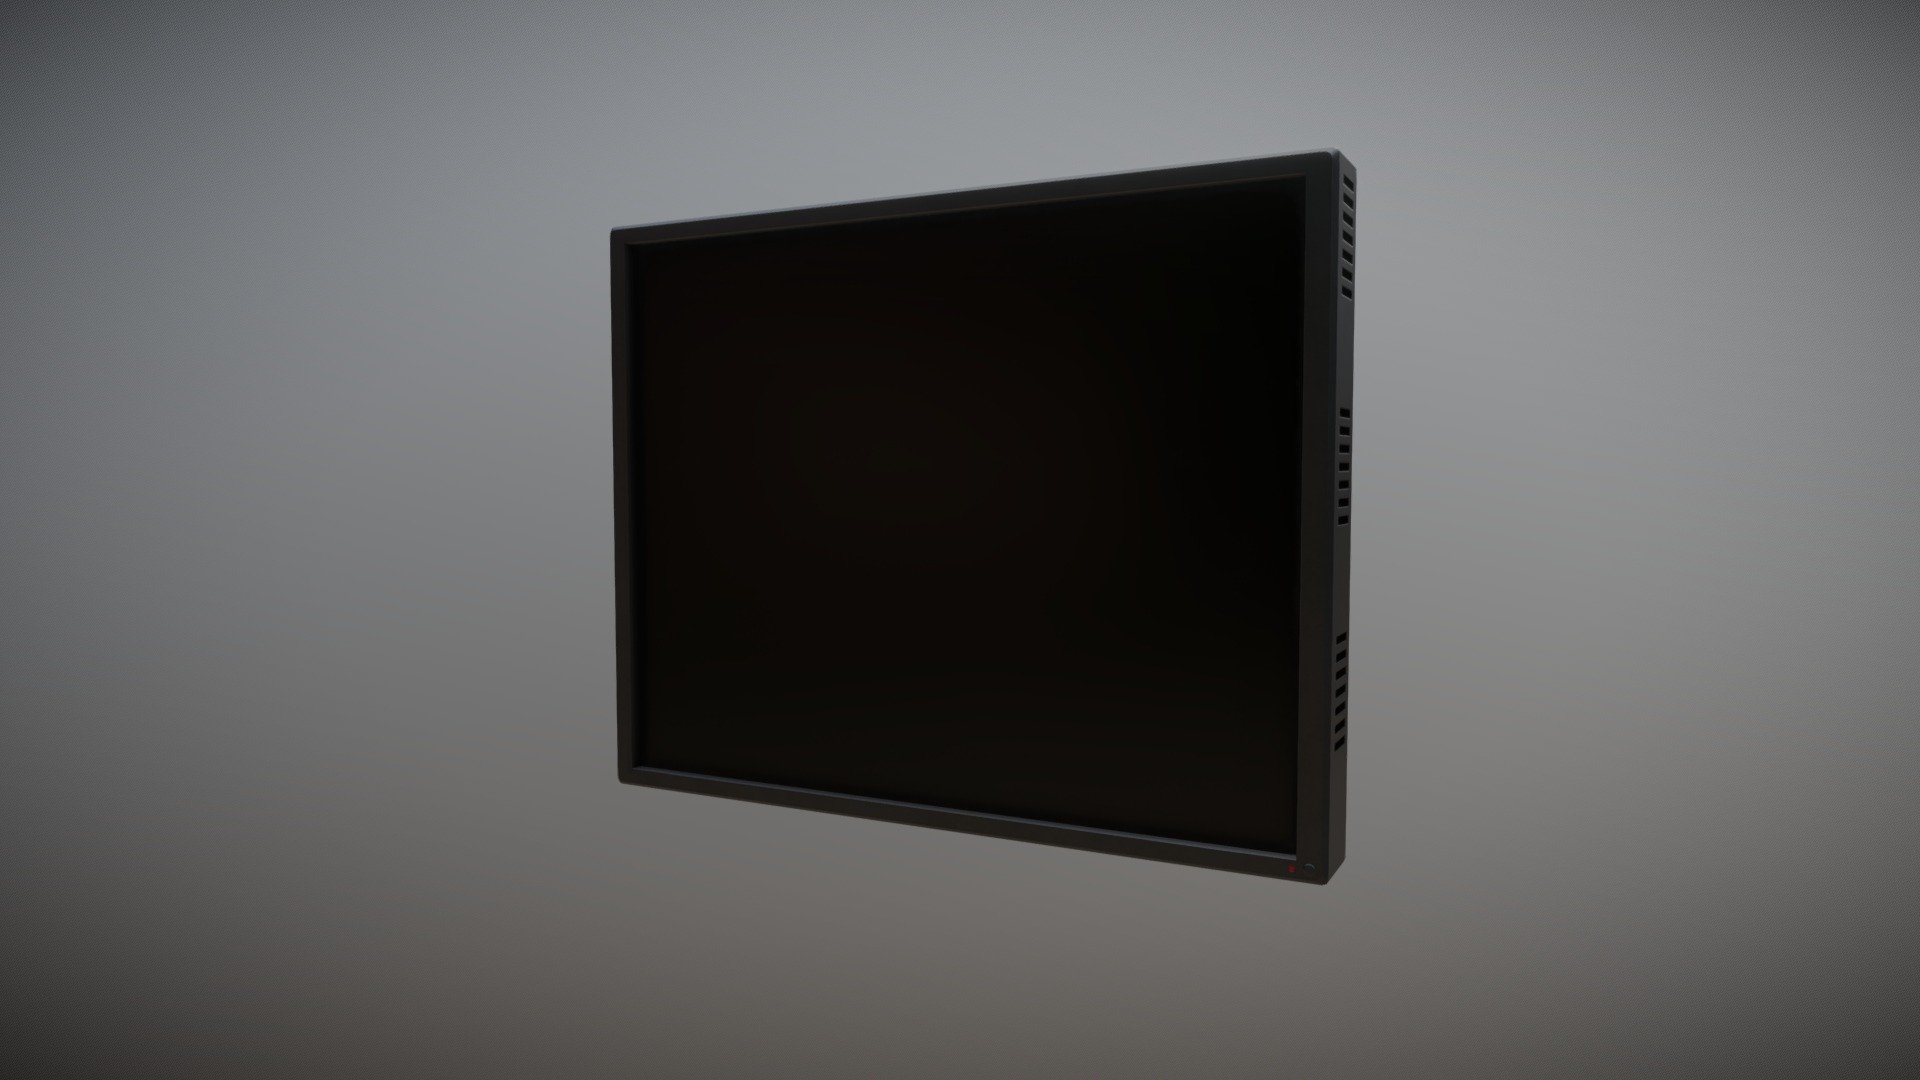 Monitor for video surveillance system
Low poly model, game ready 3d model